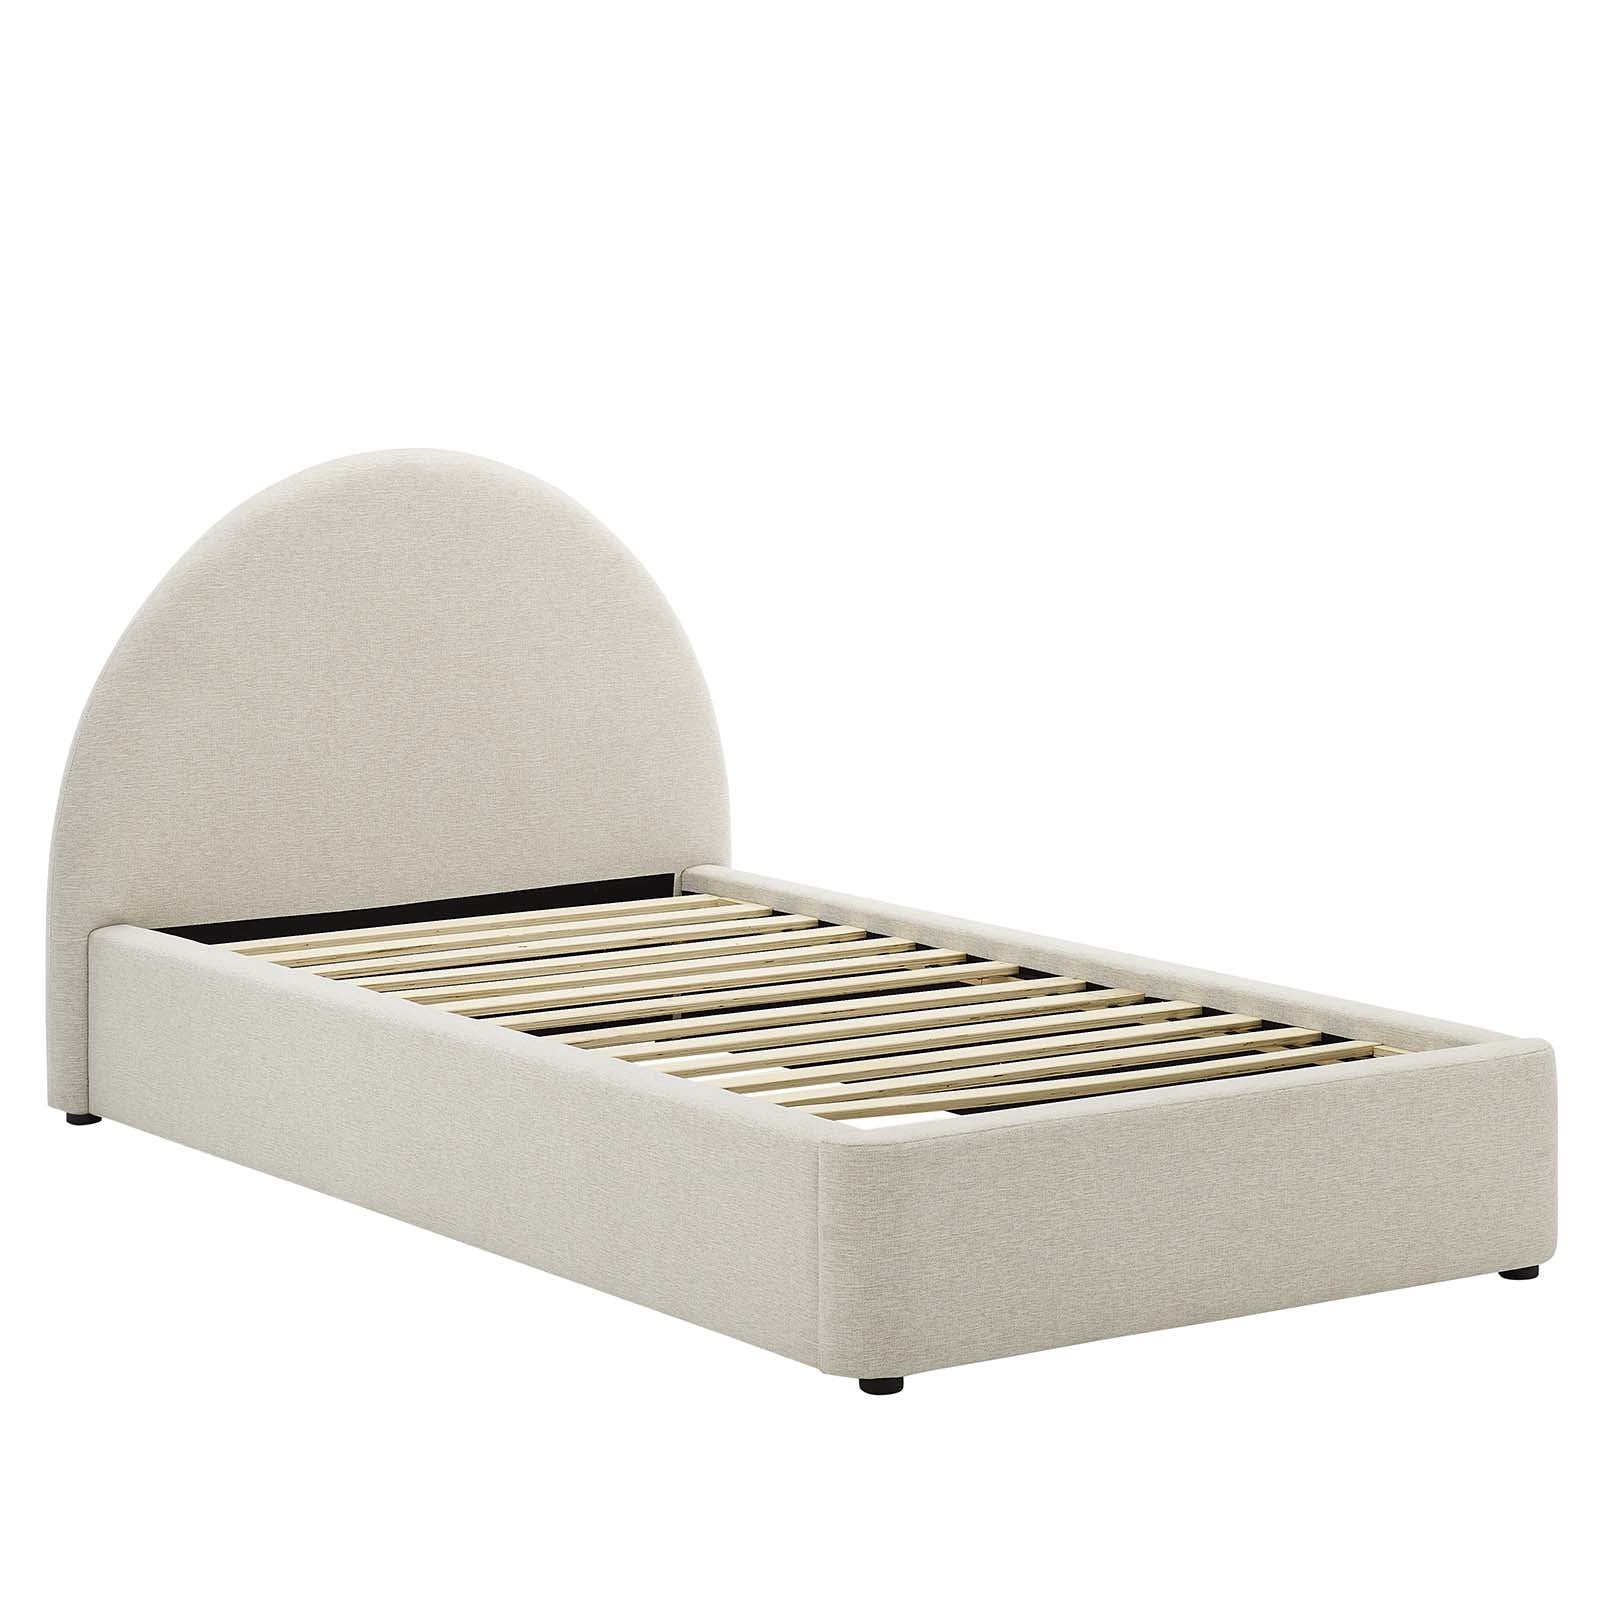 Cleo Arched Platform Bed - Heathered Weave Ivory